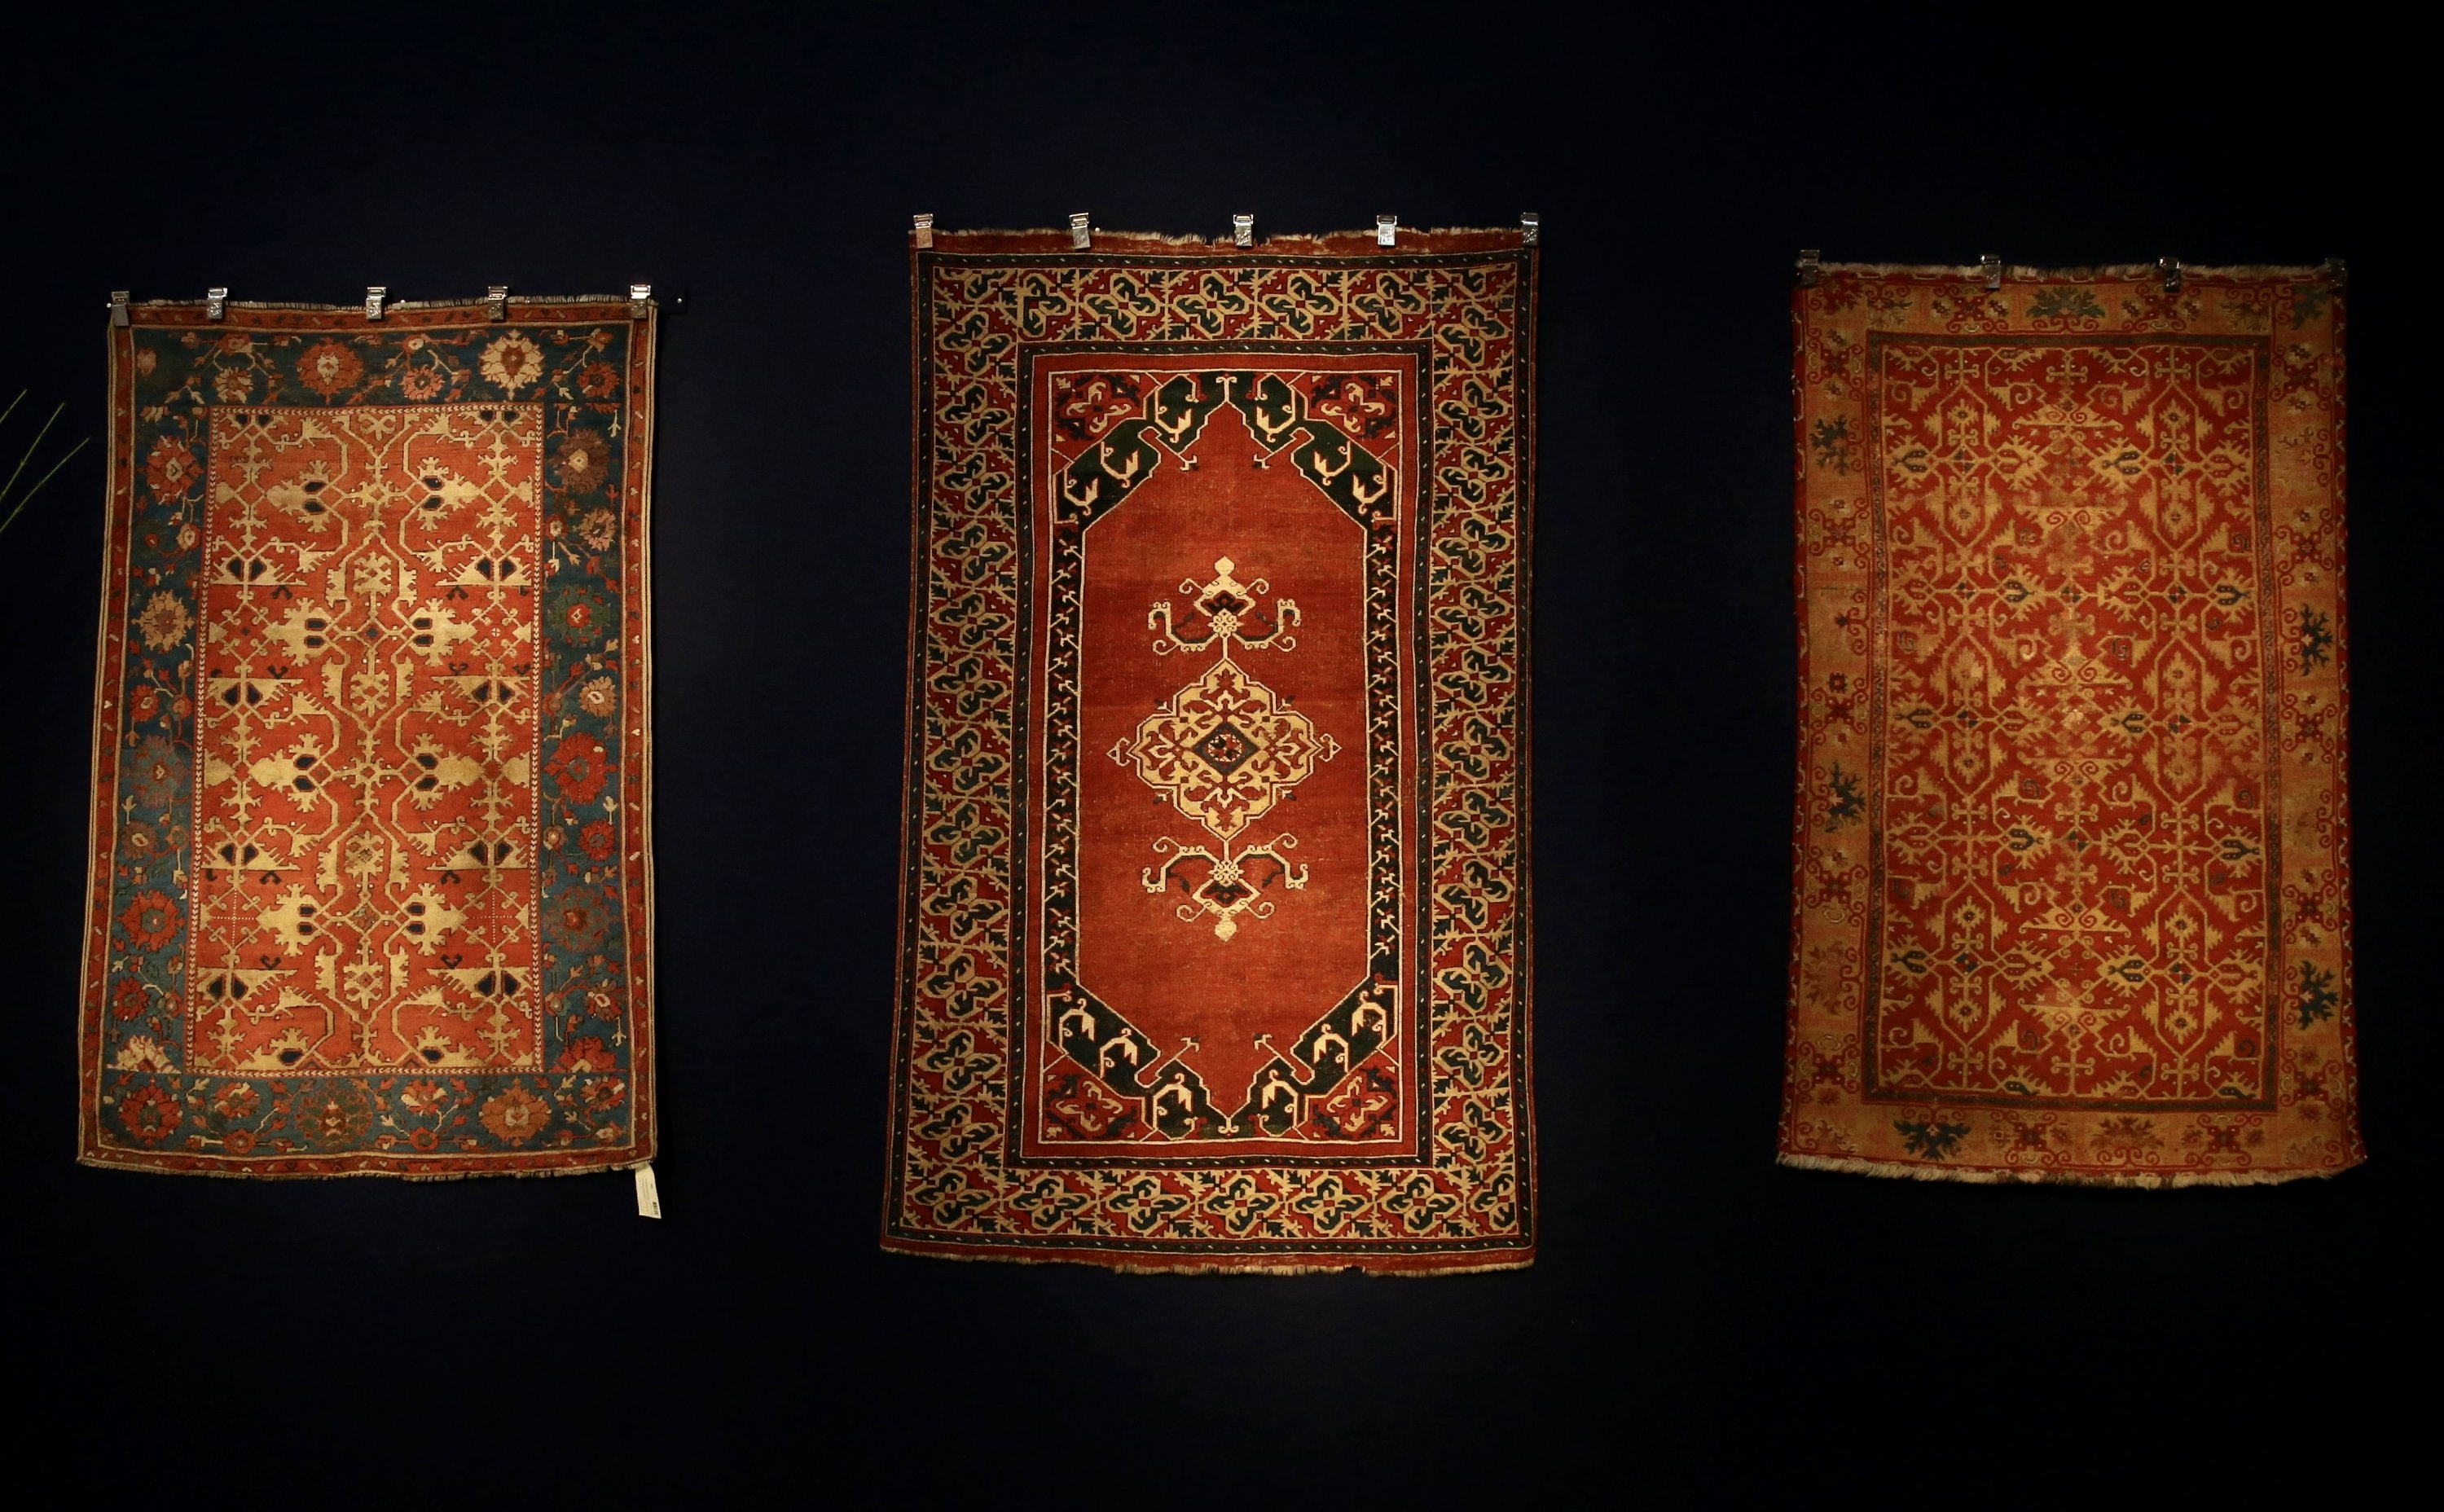 Three Turkish carpets with a Lotto design on display at Christie’s, London, Oct. 22, 2021. (AA Photo)